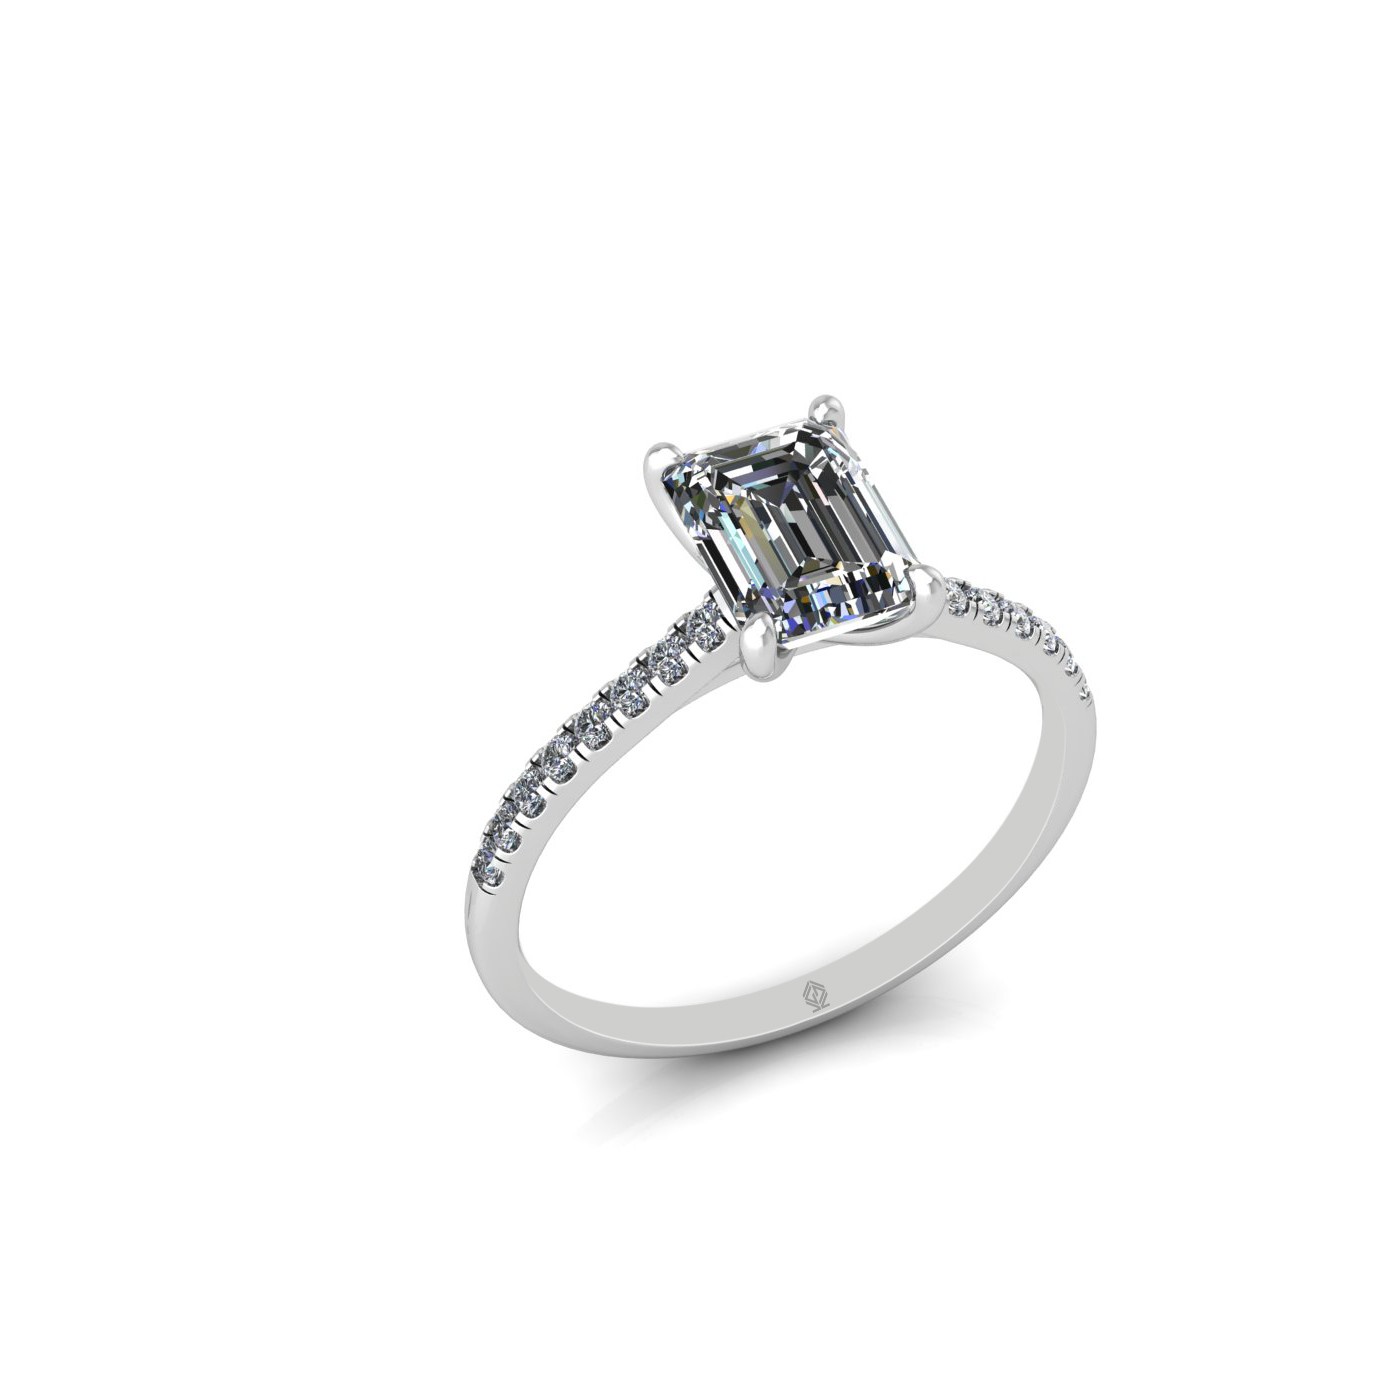 18k white gold 1.20ct 4 prongs emerald cut diamond engagement ring with whisper thin pavÉ set band